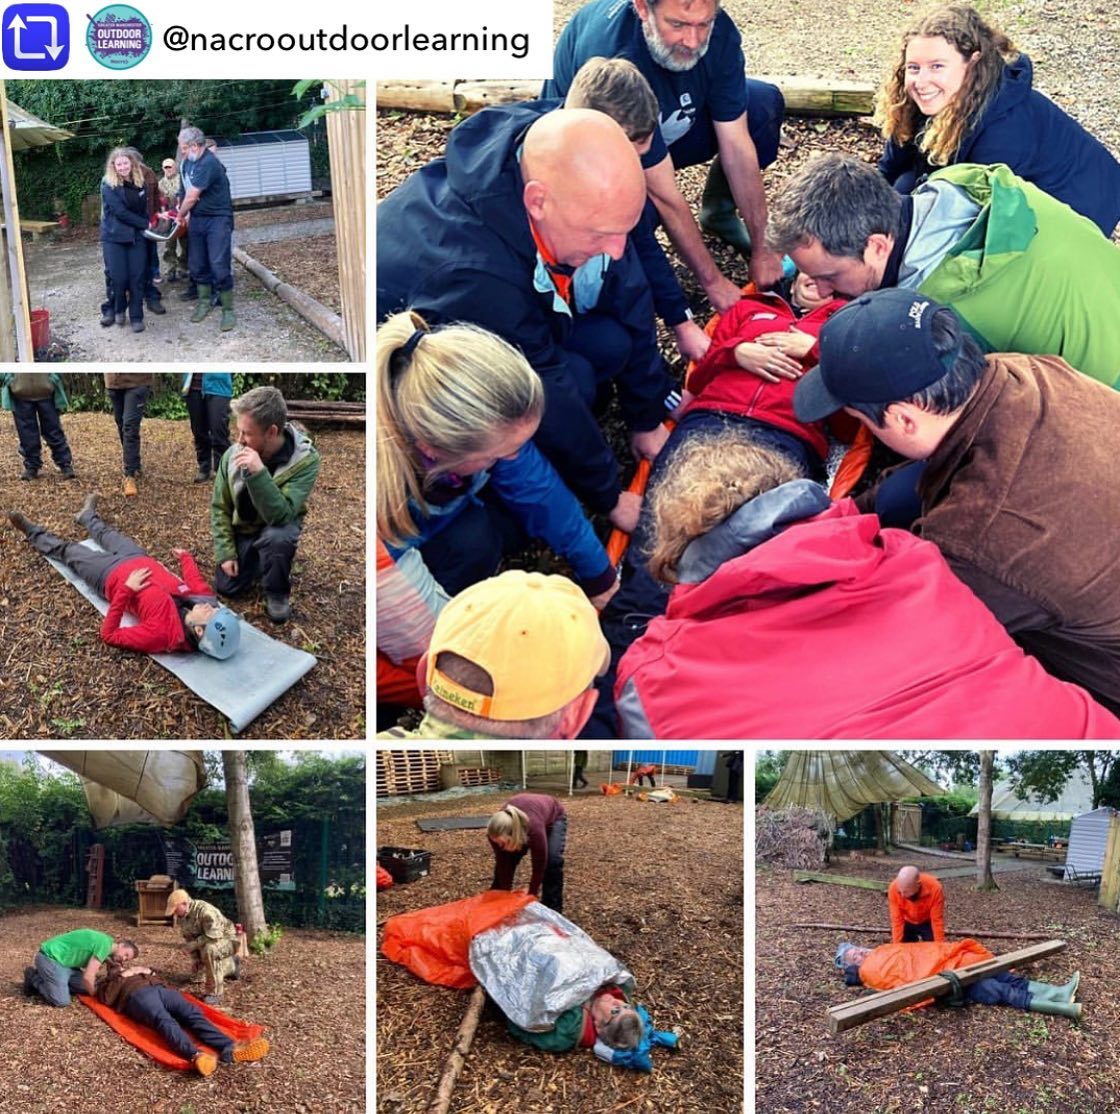 Repost from @nacrooutdoorlearning 
Huge well done to all our volunteers and Lowland Leader trainees who are now fully qualified outdoor first aiders. A fantastic day 2 of our Outdoor First Aid course with @wilderness_development today at Wythenshawe Park.  @parks_great